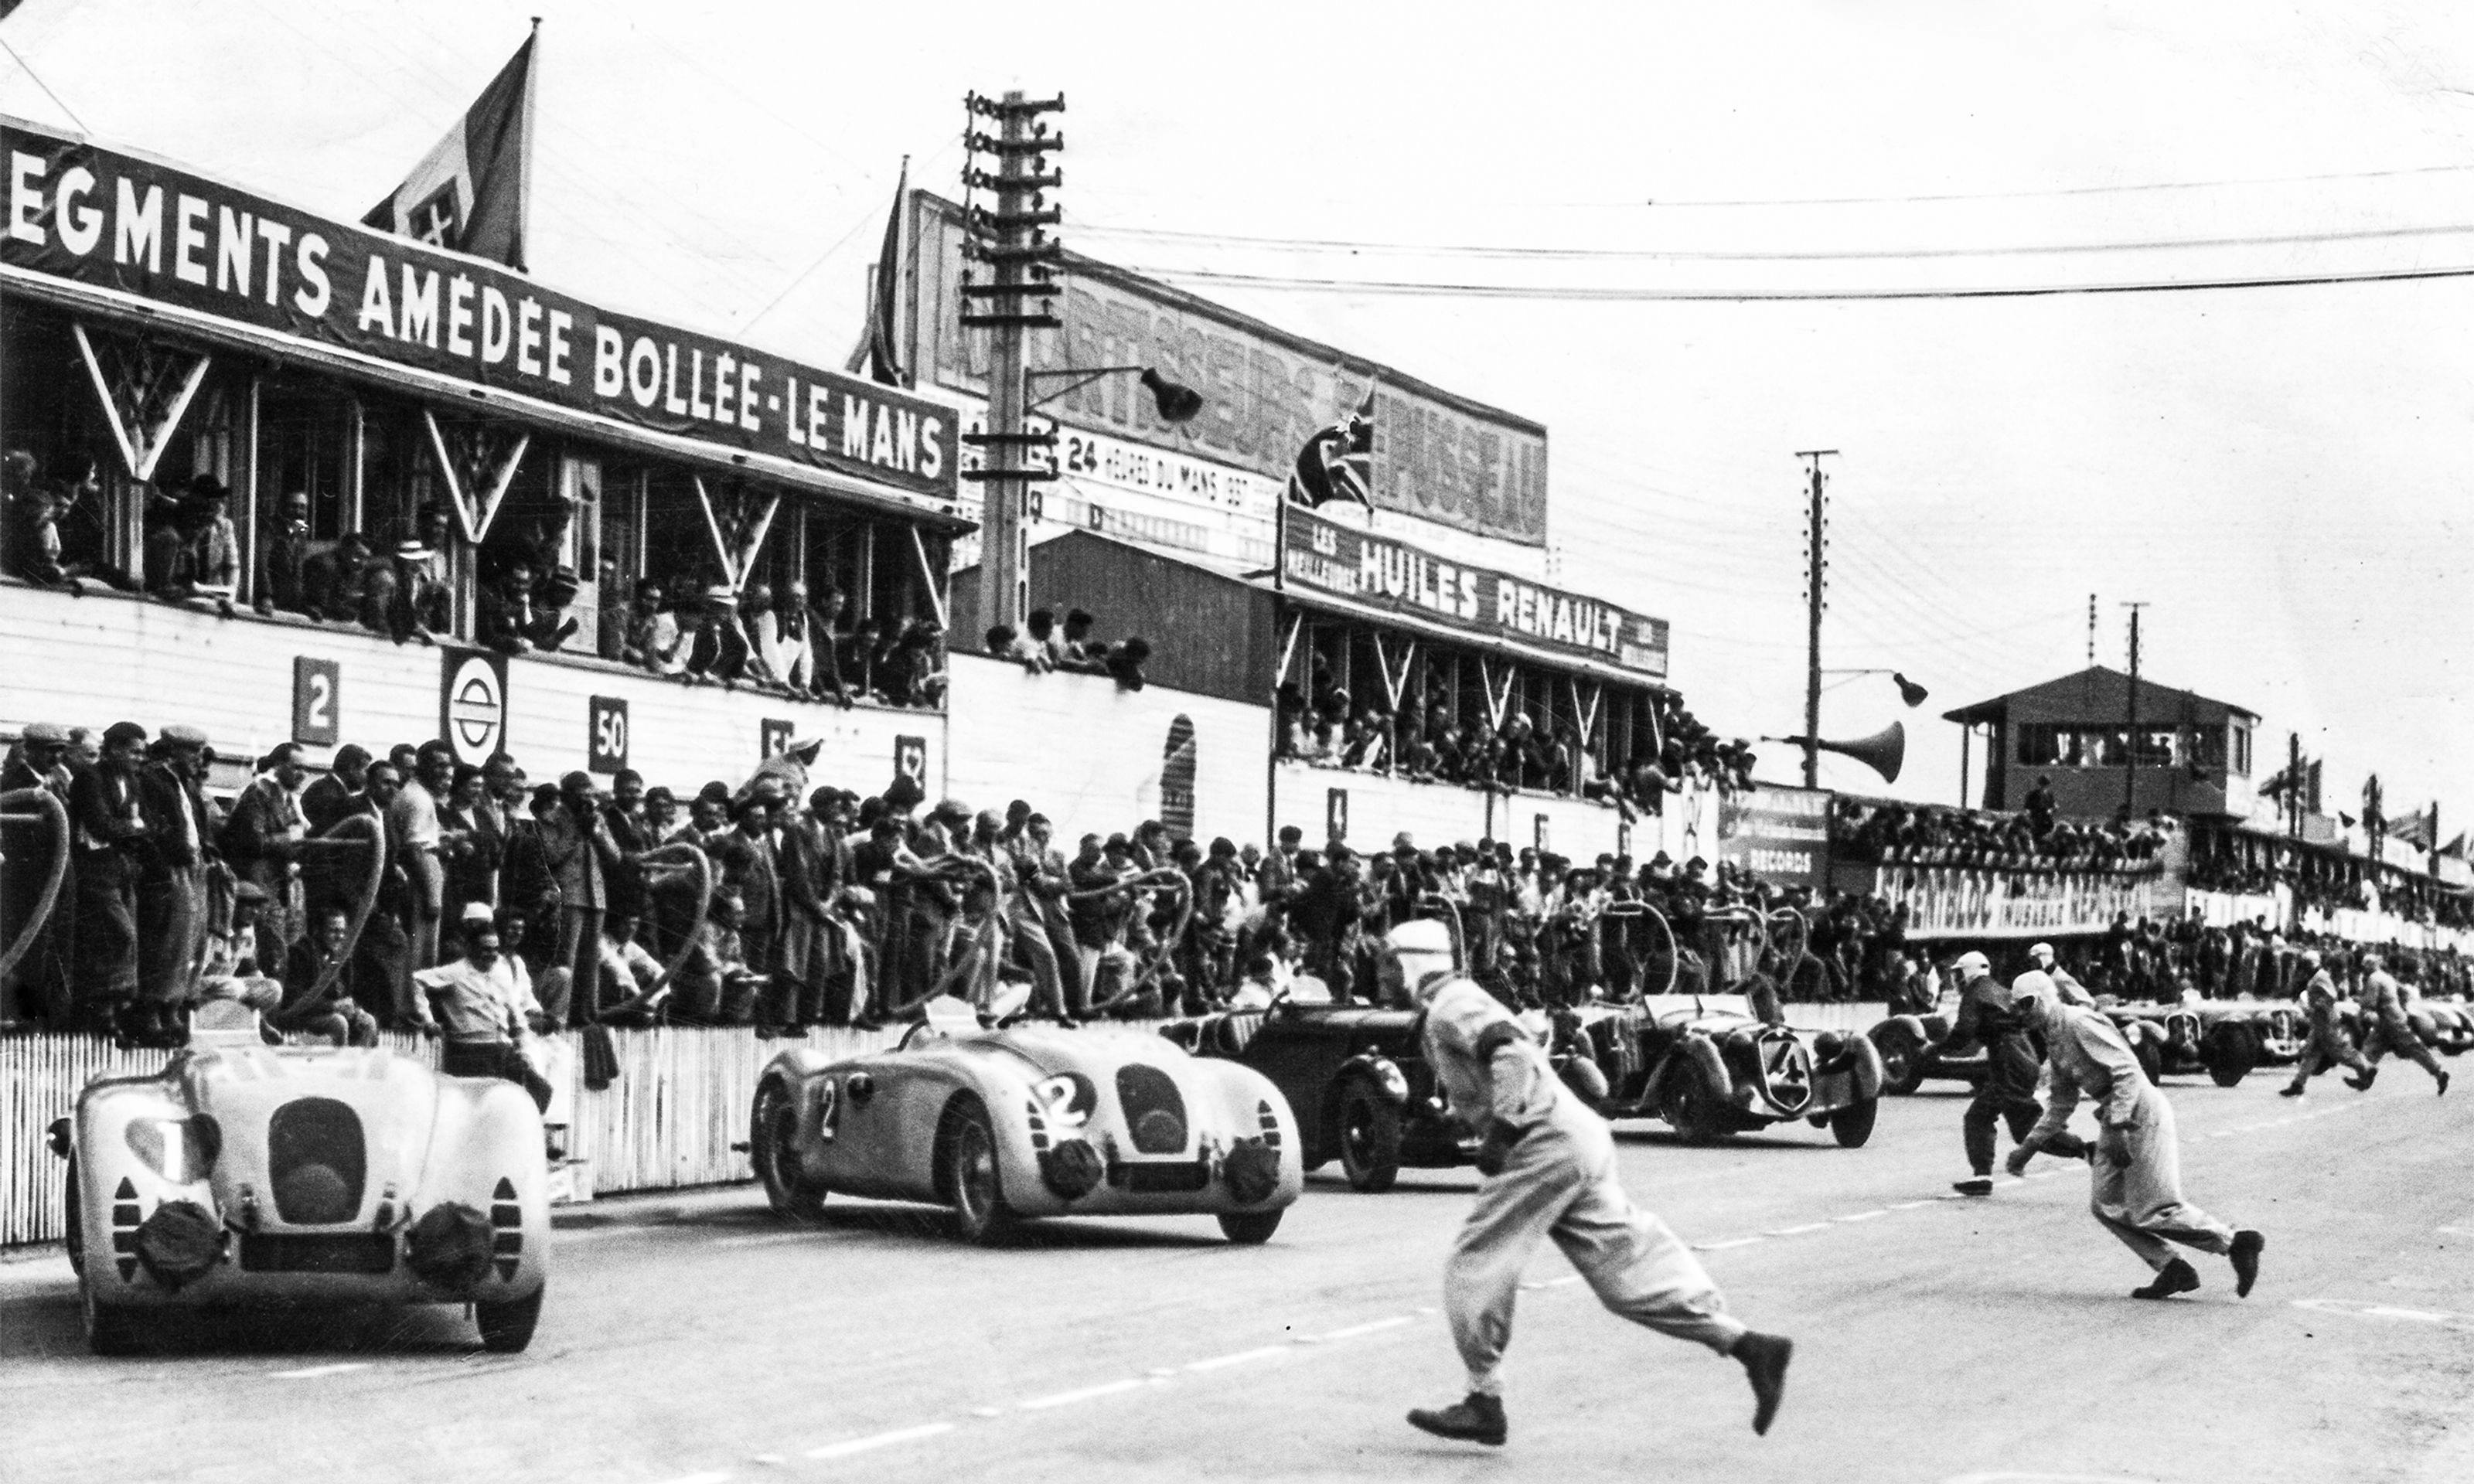 The history of Bugatti at 24 Hours of Le Mans